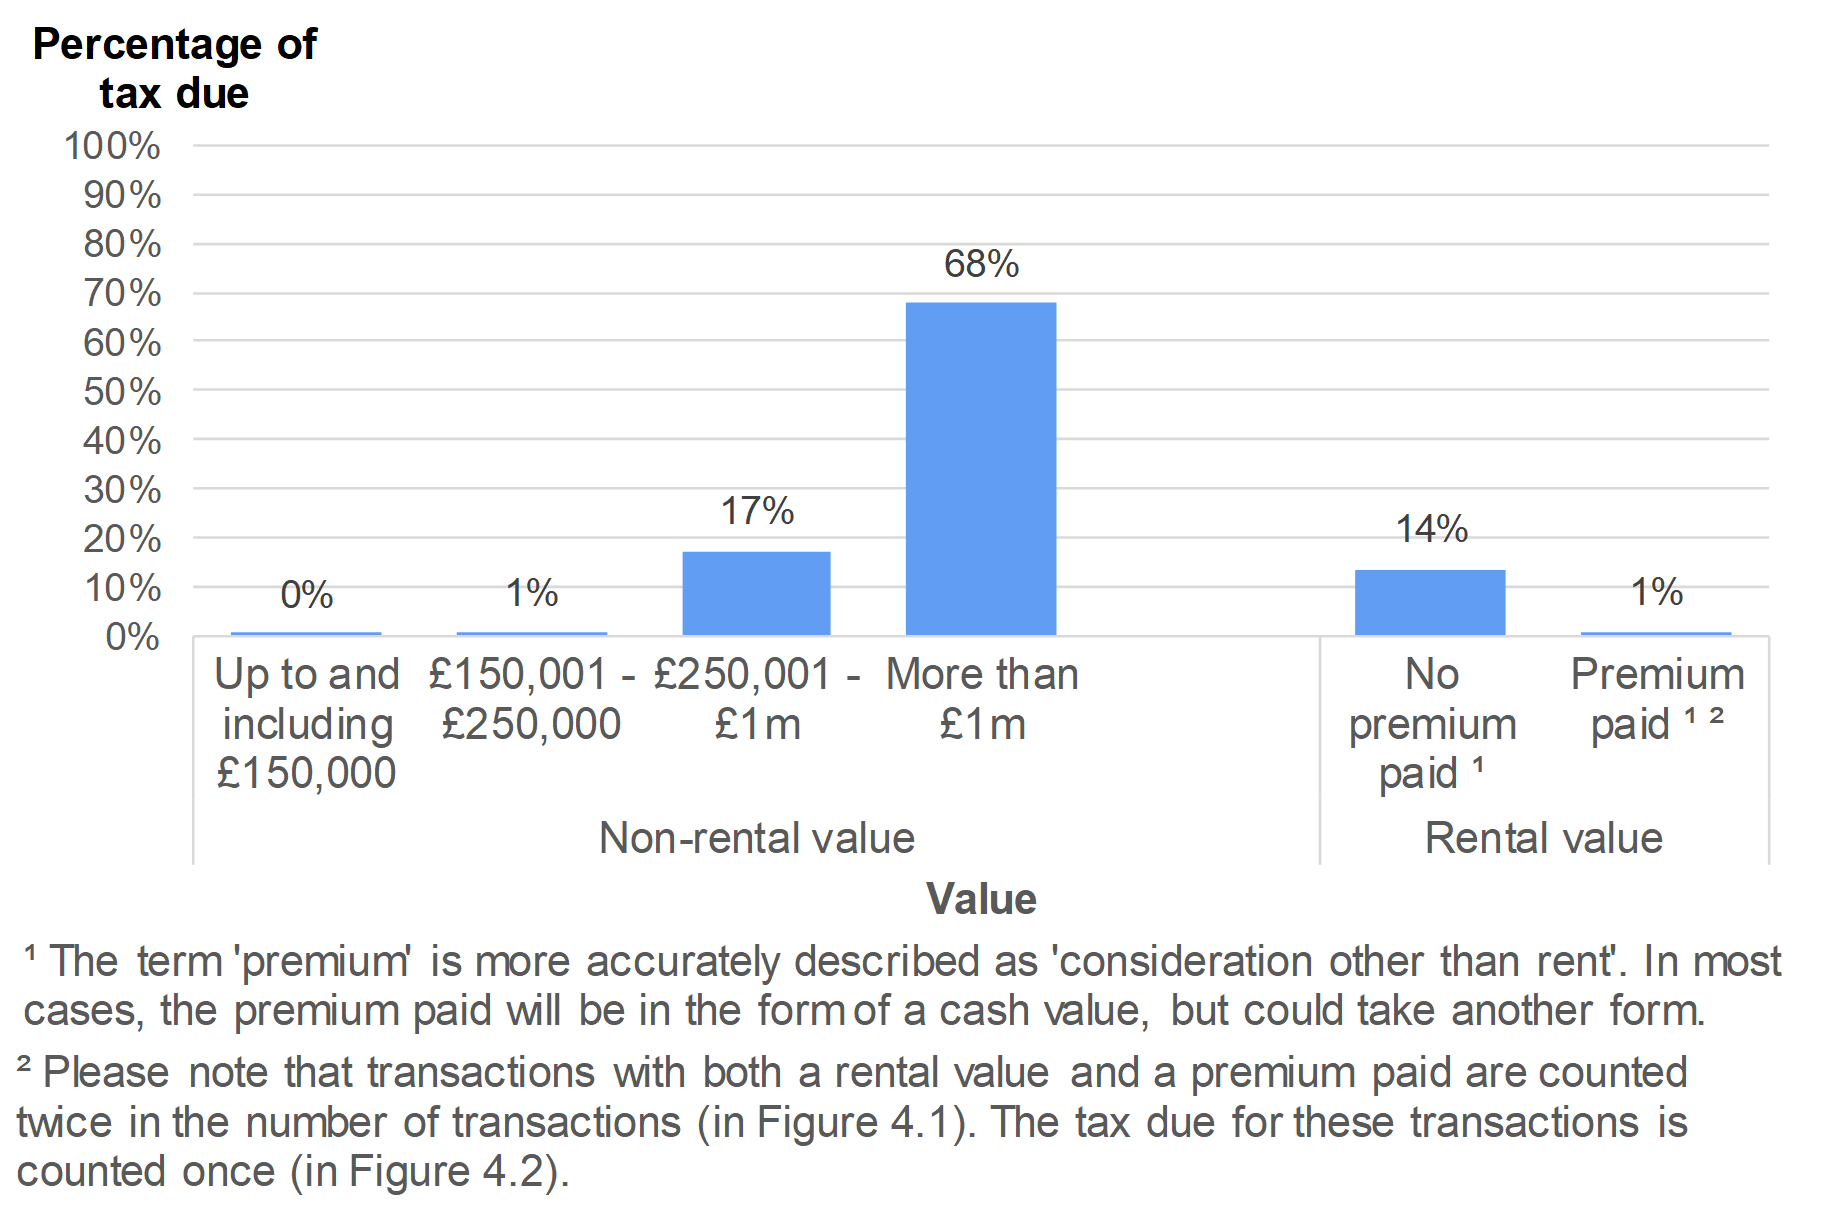 Figure 4.2 shows the amount of tax due on non-residential transactions, by value of the property. Data is presented as the percentage of transactions and relates to transactions effective in April 2018 to March 2019.